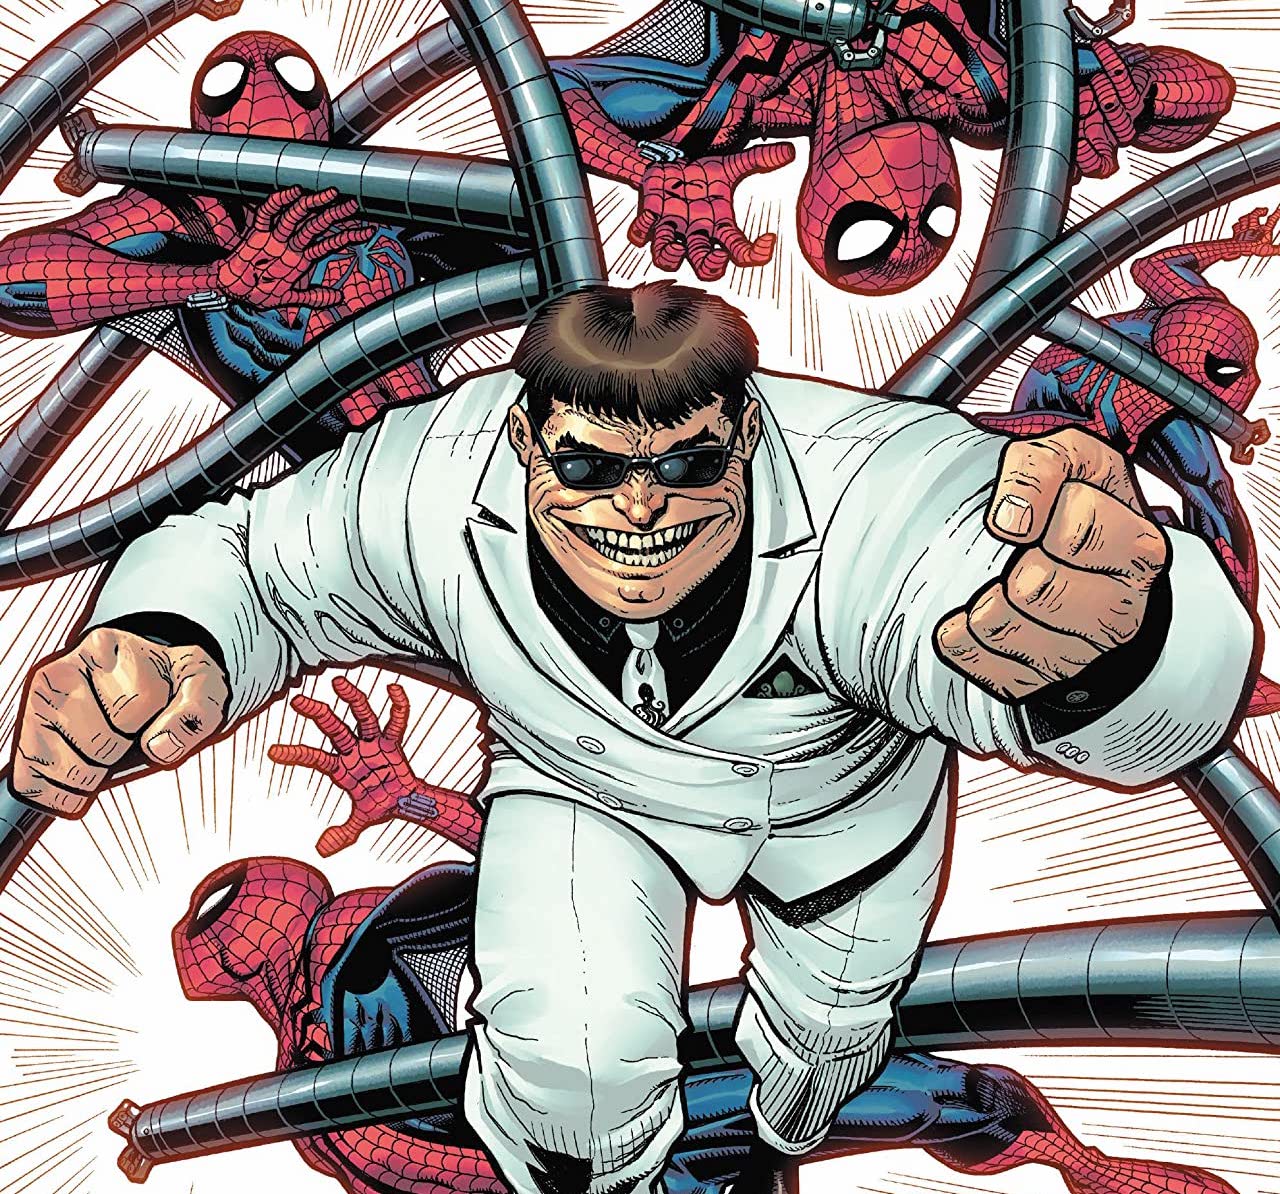 'The Amazing Spider-Man' #84 features a throwdown with Doc Ock